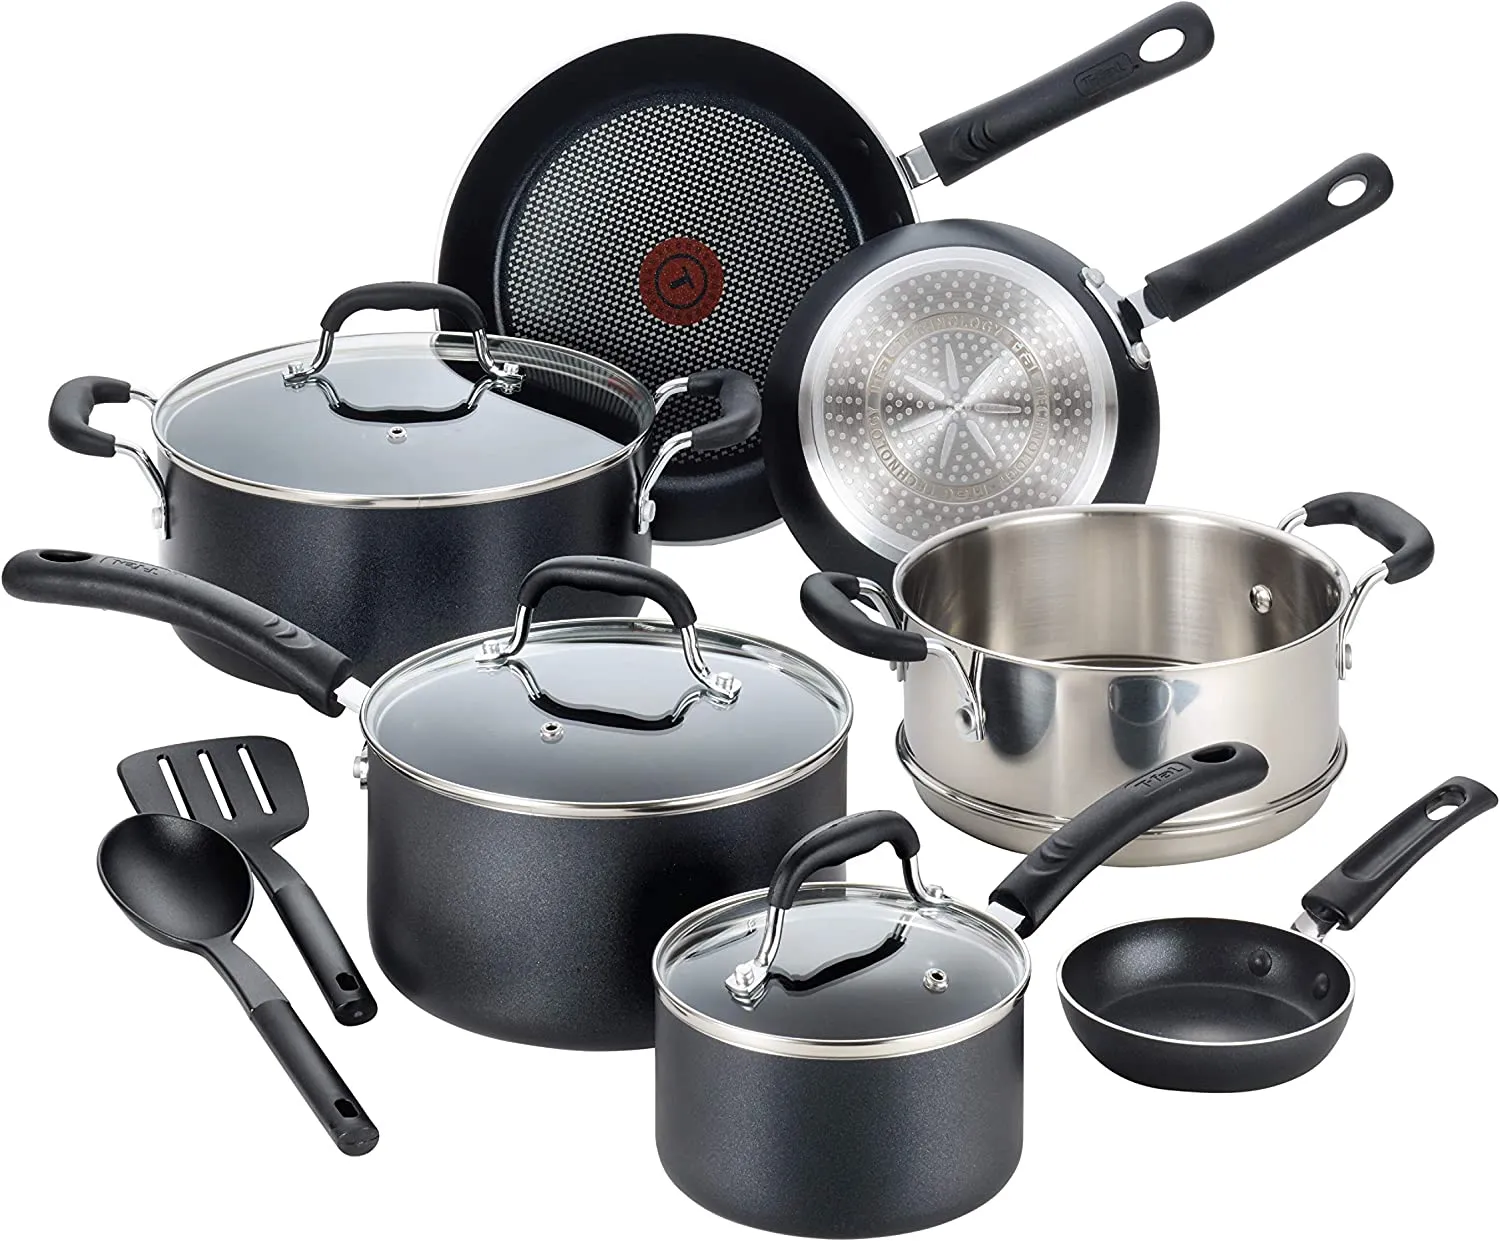 T-fal Professional Nonstick Dishwasher Safe Cookware